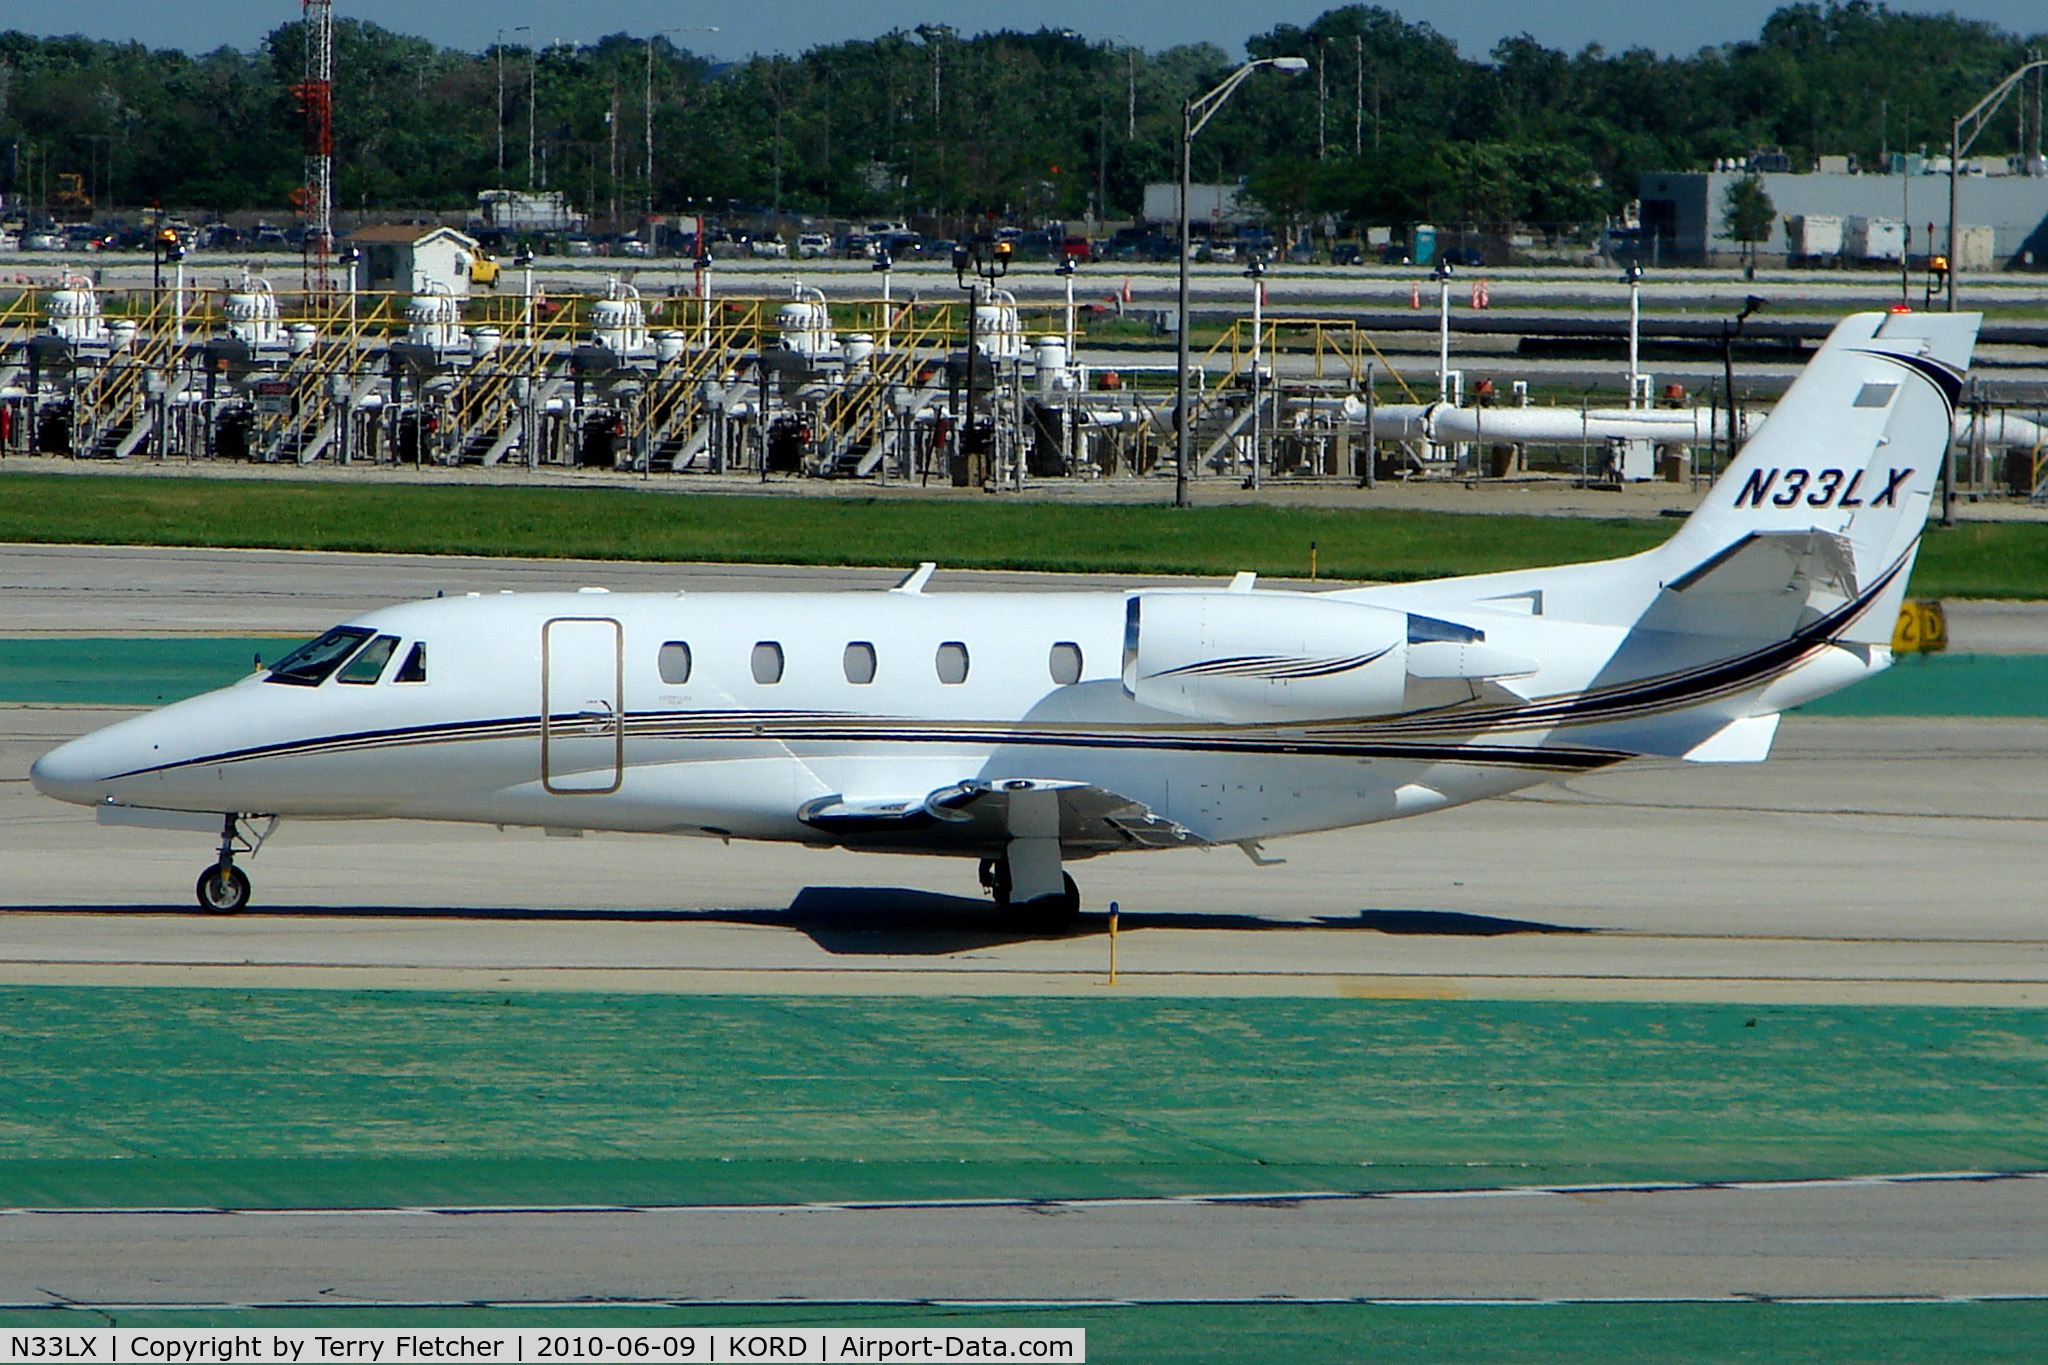 N33LX, Cessna 560XL C/N 5606010, Cessna 560XL, c/n: 5606010 taxying at Chicago O'Hare